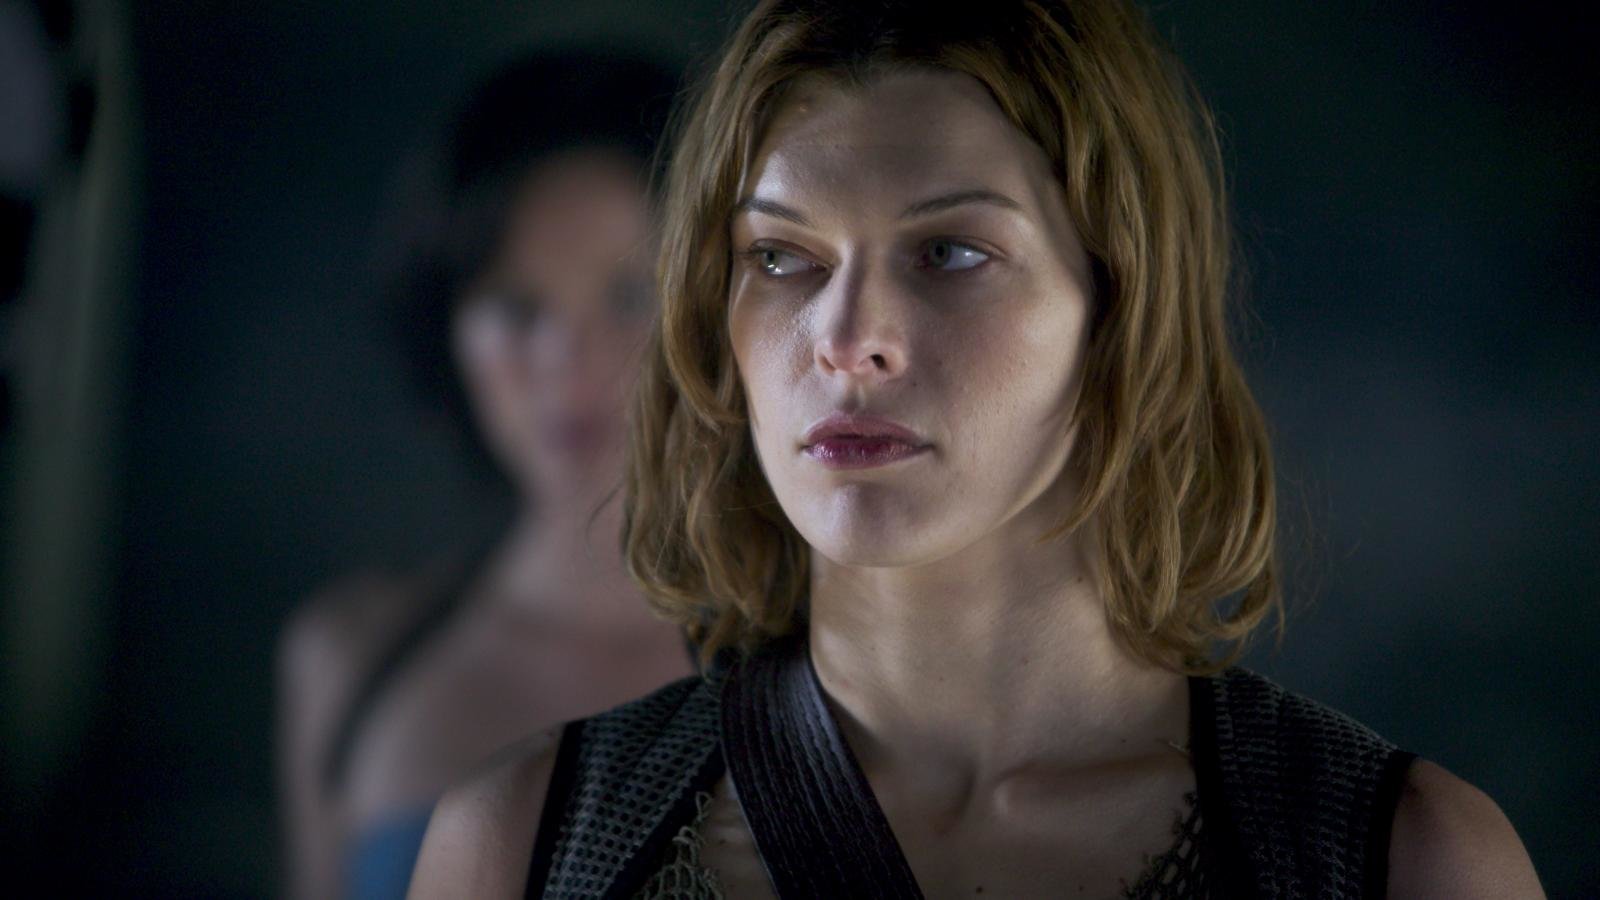 Best Resident Evil: Apocalypse wallpaper ID:100052 for High Resolution hd 1600x900 computer